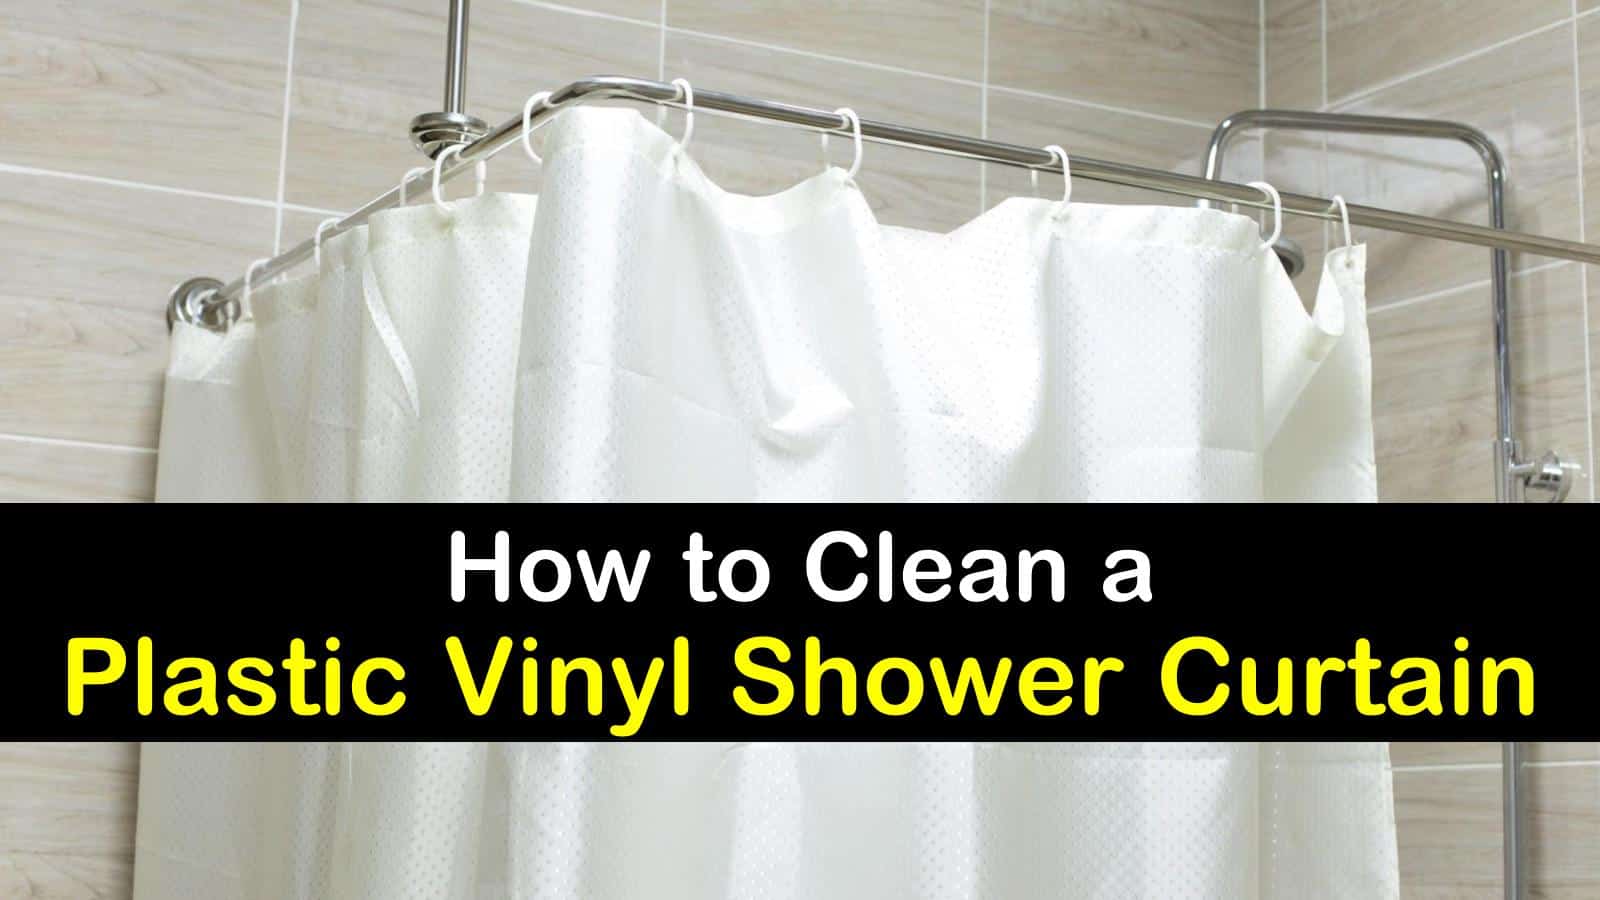 5 Excellent Ways To Clean A Shower Curtain, How To Clean Your Shower Curtain Liner